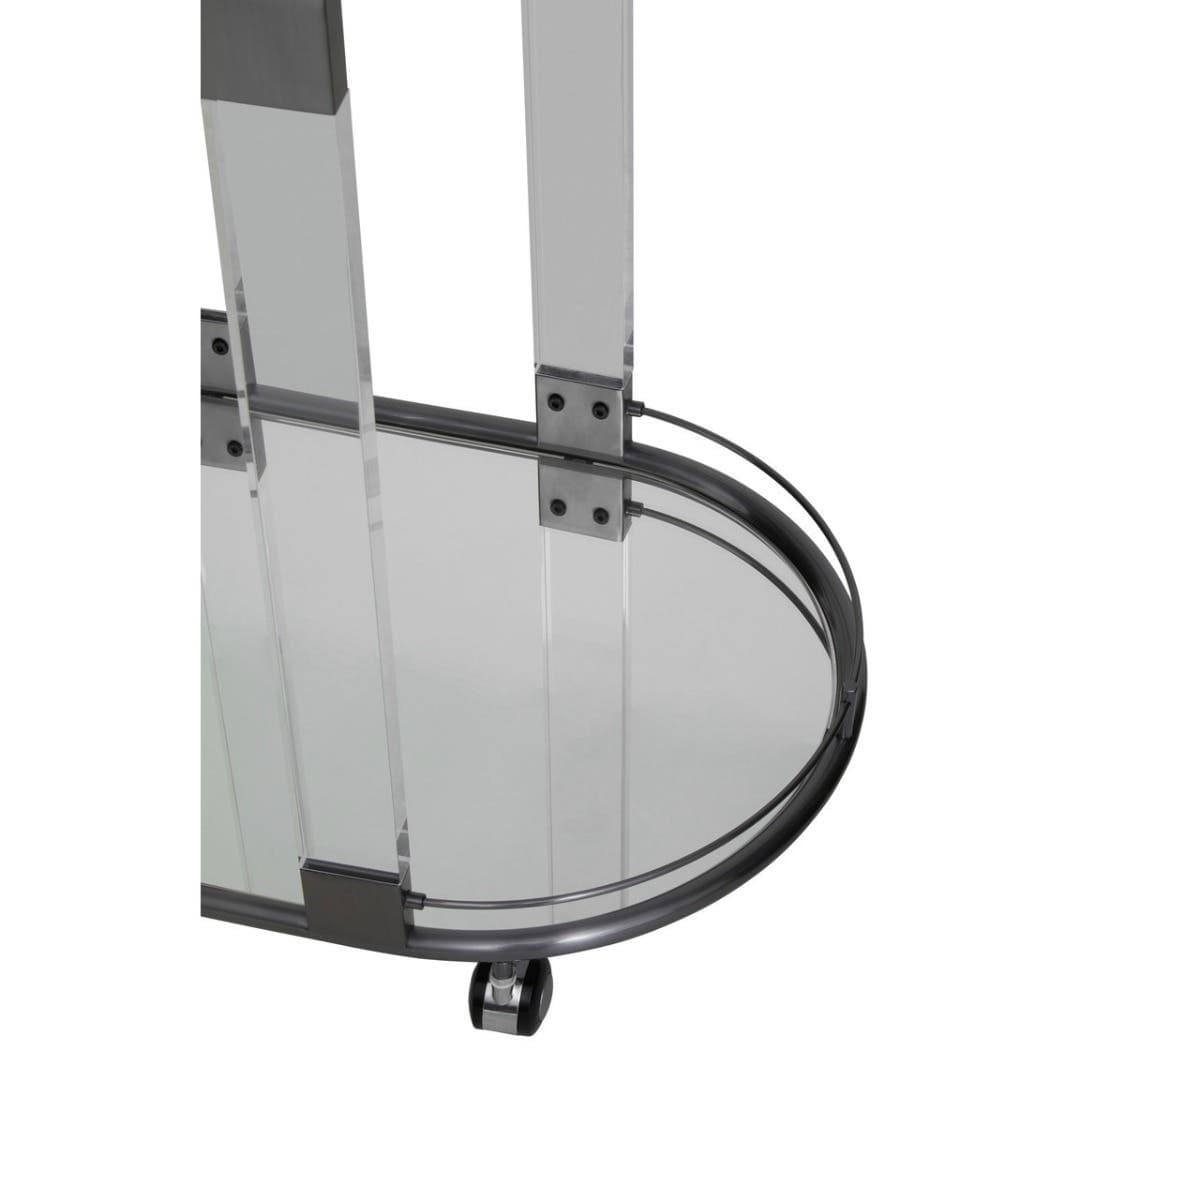 Noosa & Co. Dining Oria Mirrored Trolley With Cool Metallic Frame House of Isabella UK